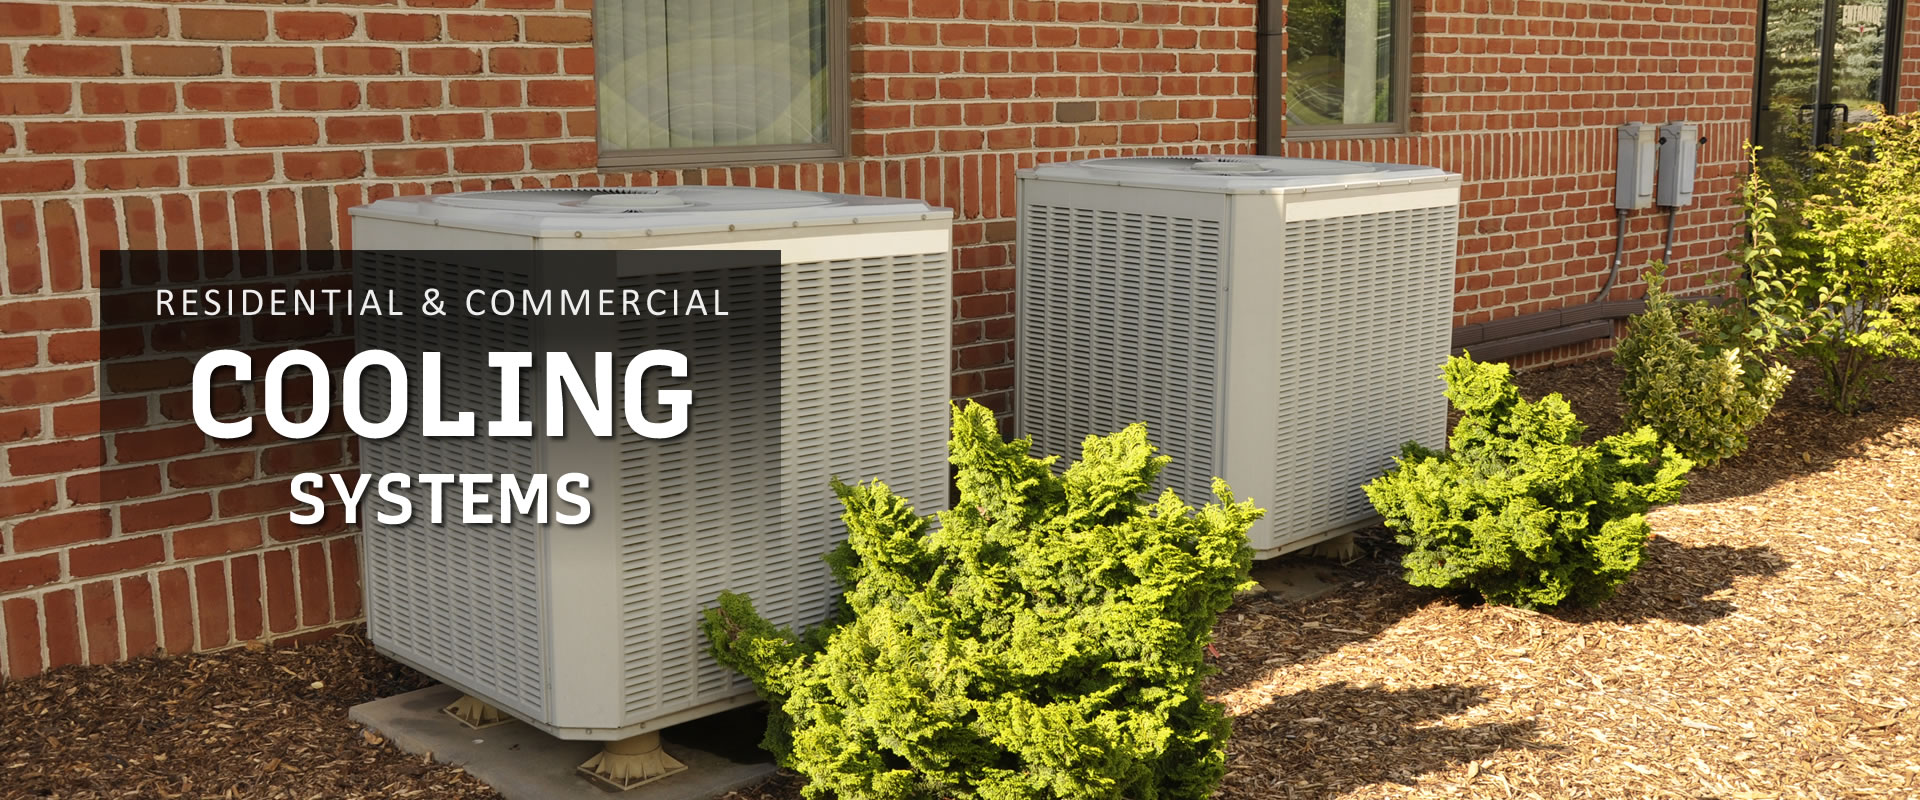 Cooling Systems | Air Conditioning | Air Cooling Systems